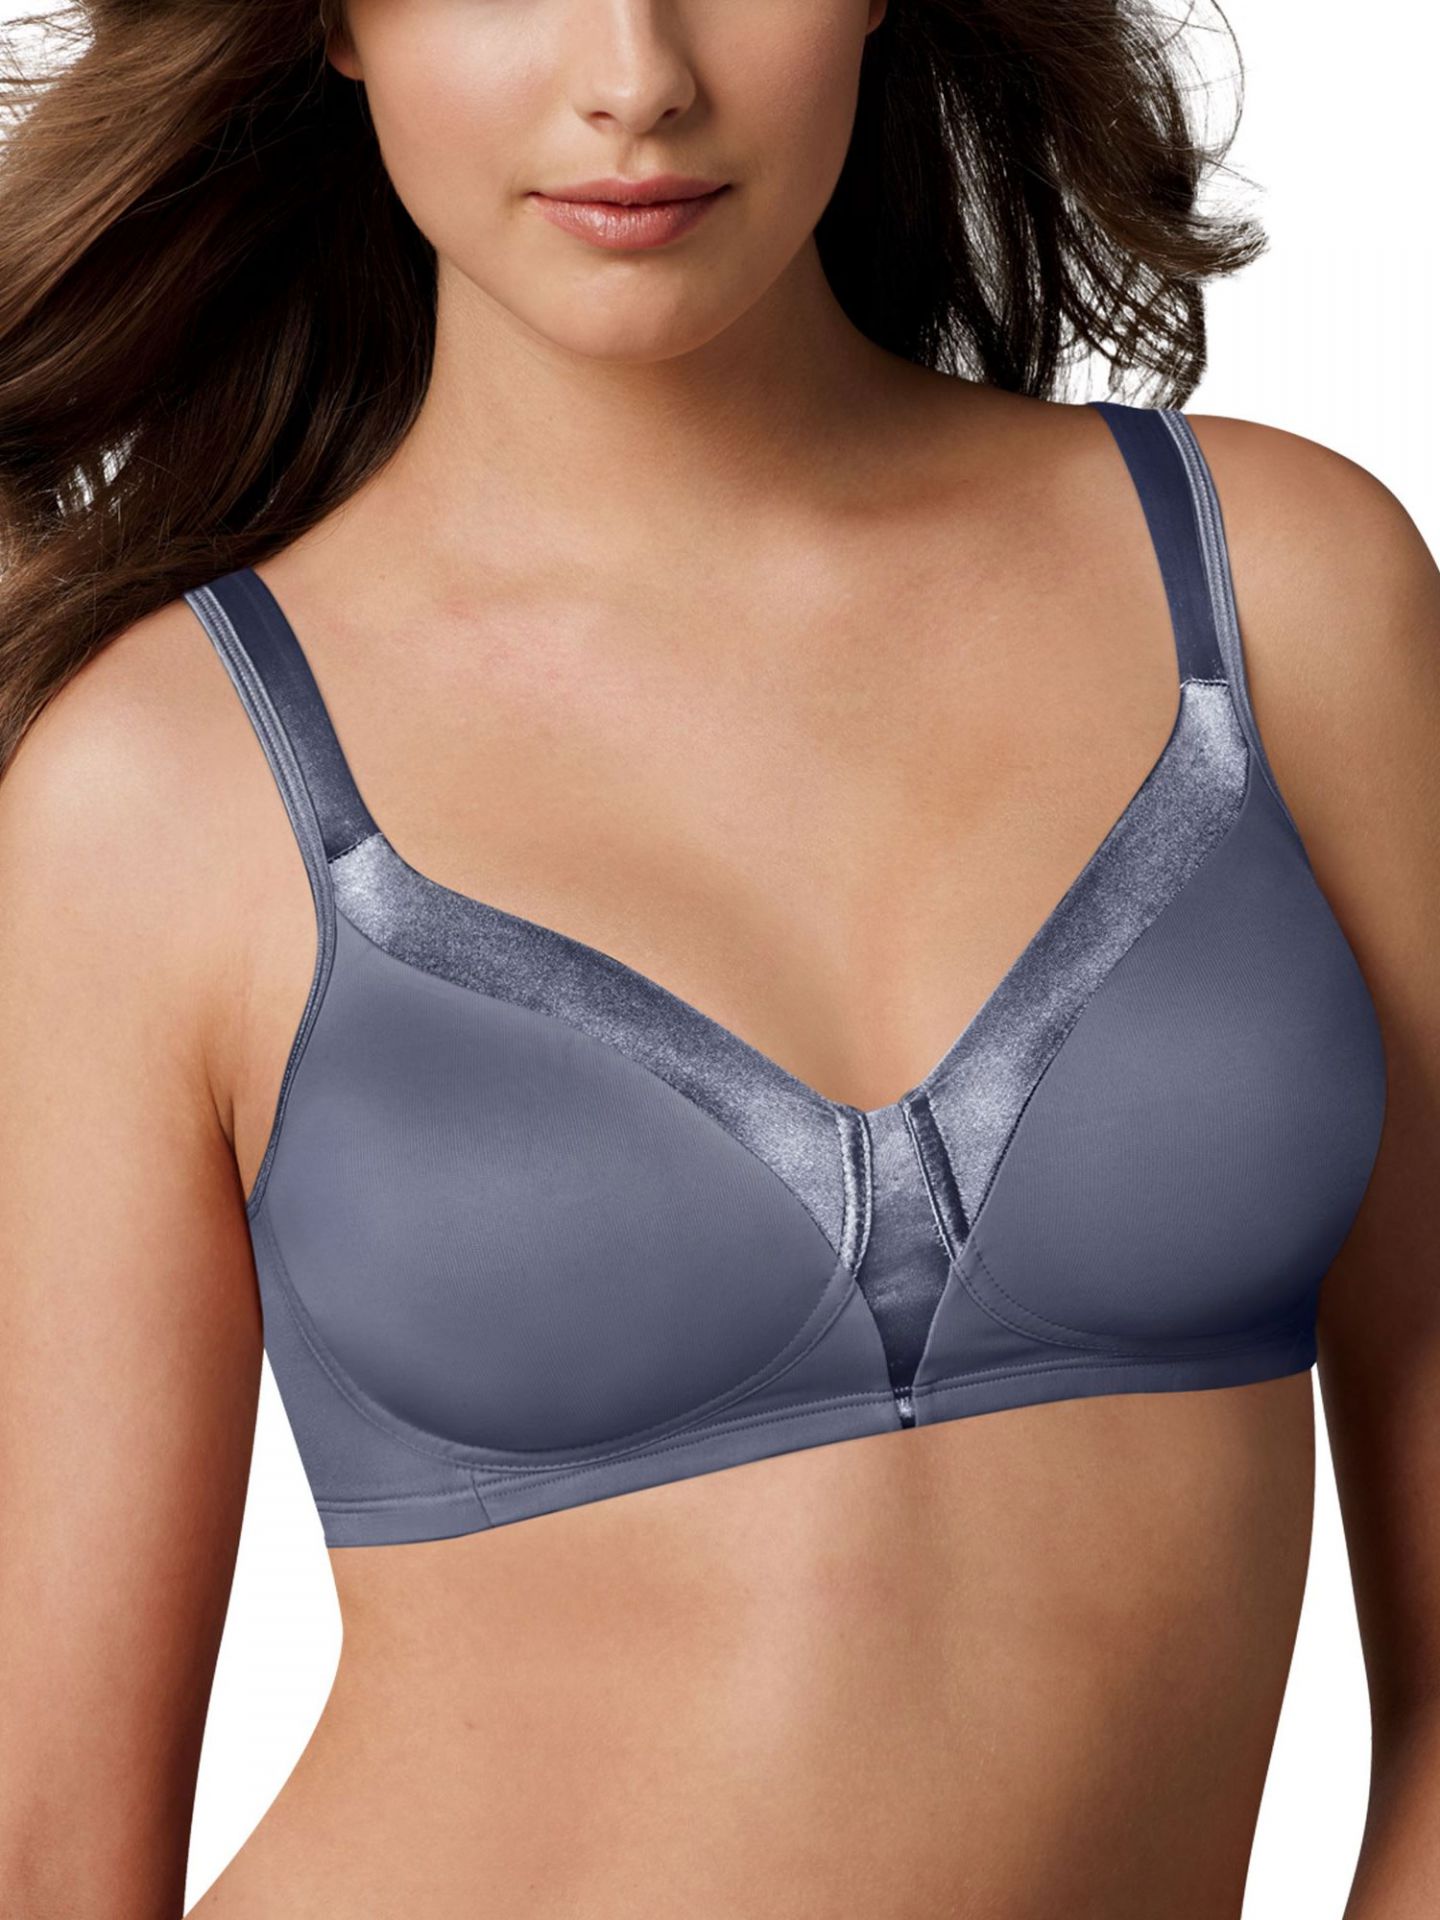 Playtex 18 Hour Bra 46c No Underwire Private Jet 46 C 4803 AA for sale  online